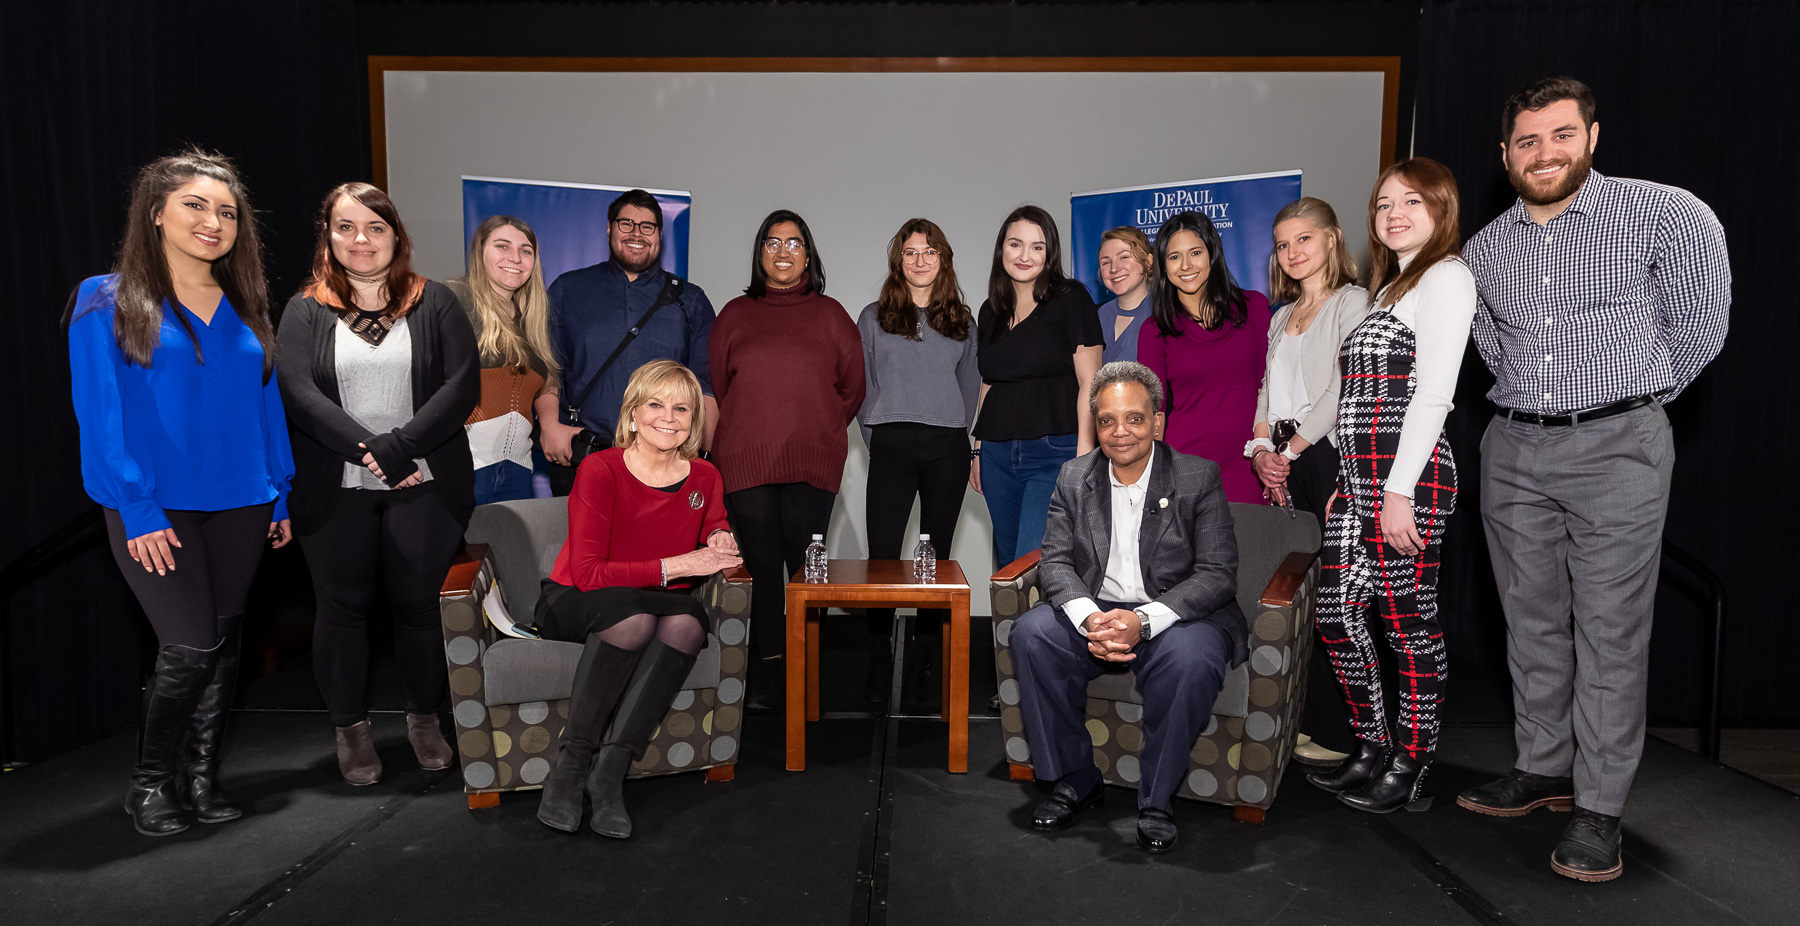 DePaul University students in Advanced Reporting pose for a photo with their instructor Carol Marin (seated left) and Chicago Mayor Lori Lightfoot. (DePaul University/Jeff Carrion)